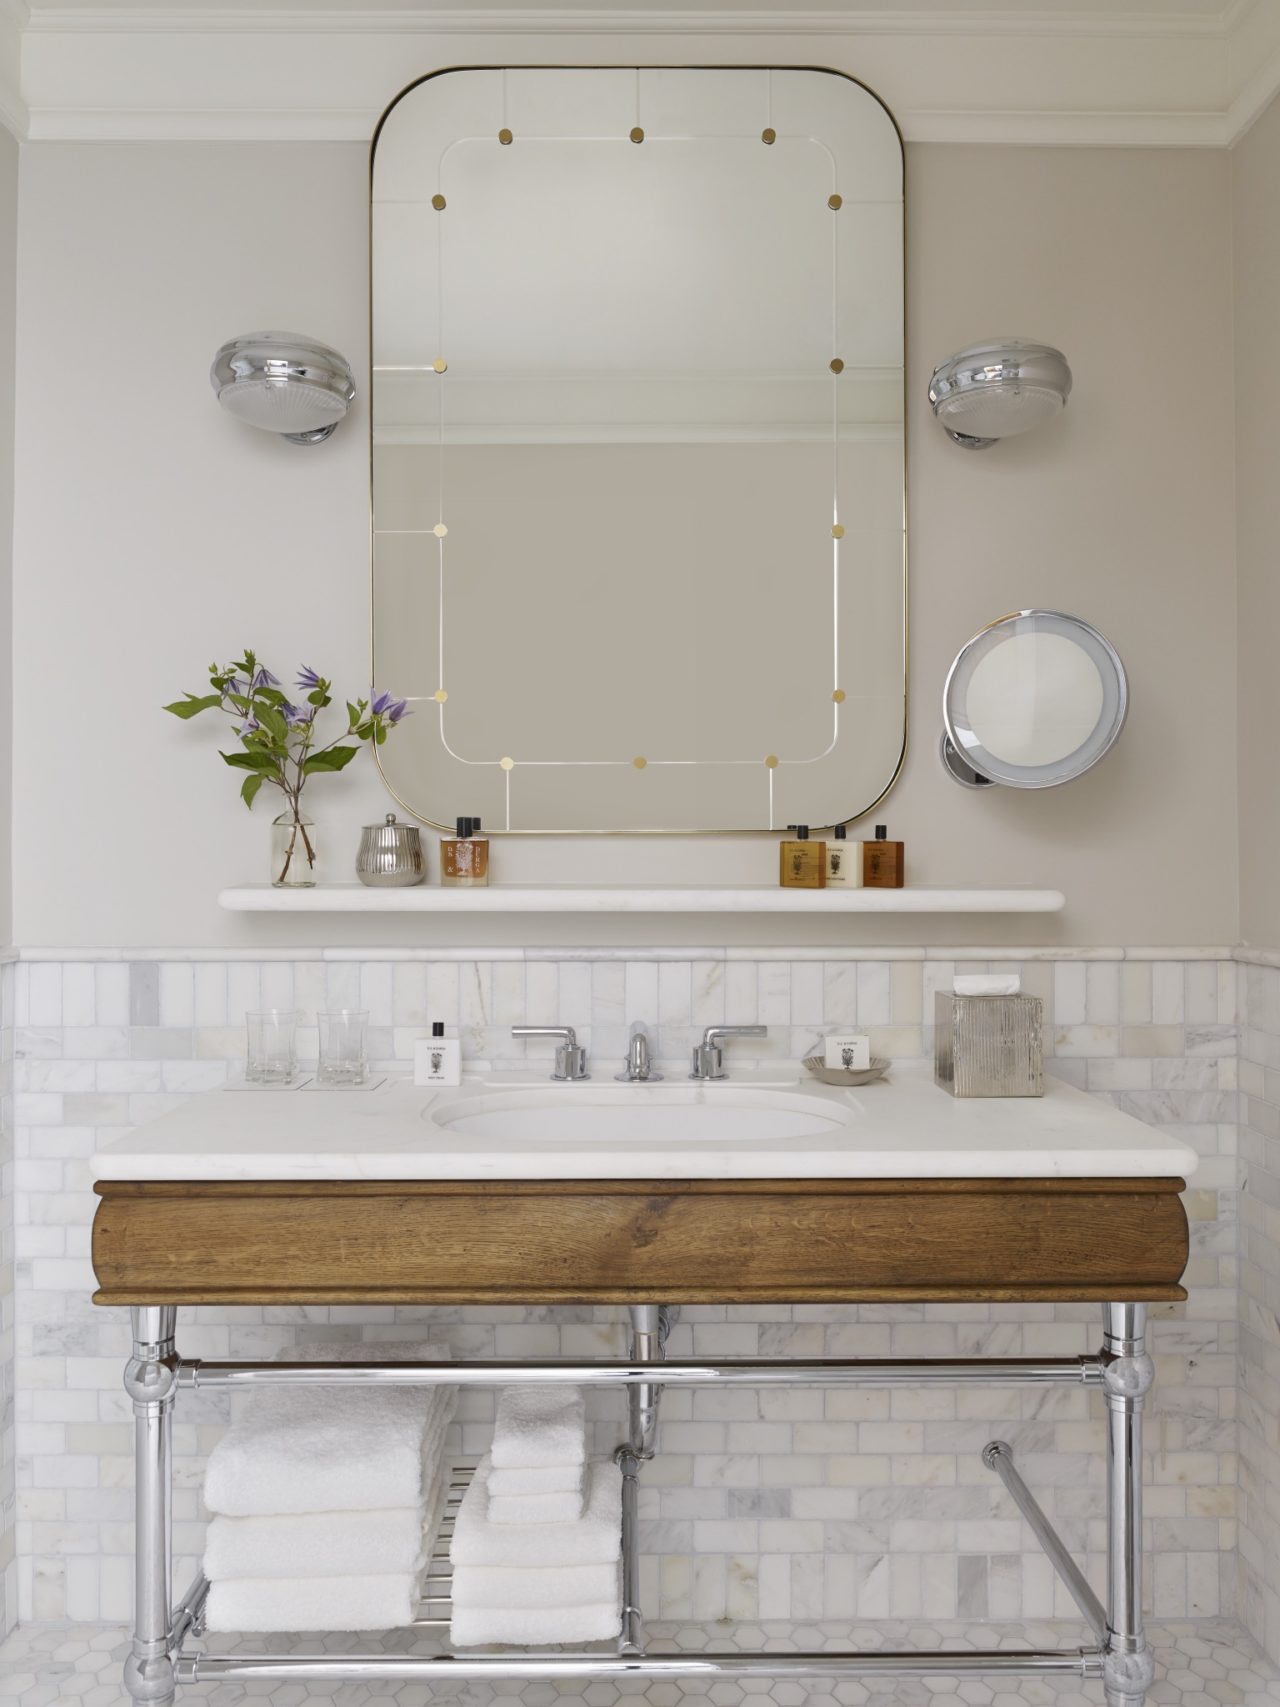 A large size mirror just hanging above the wash basin